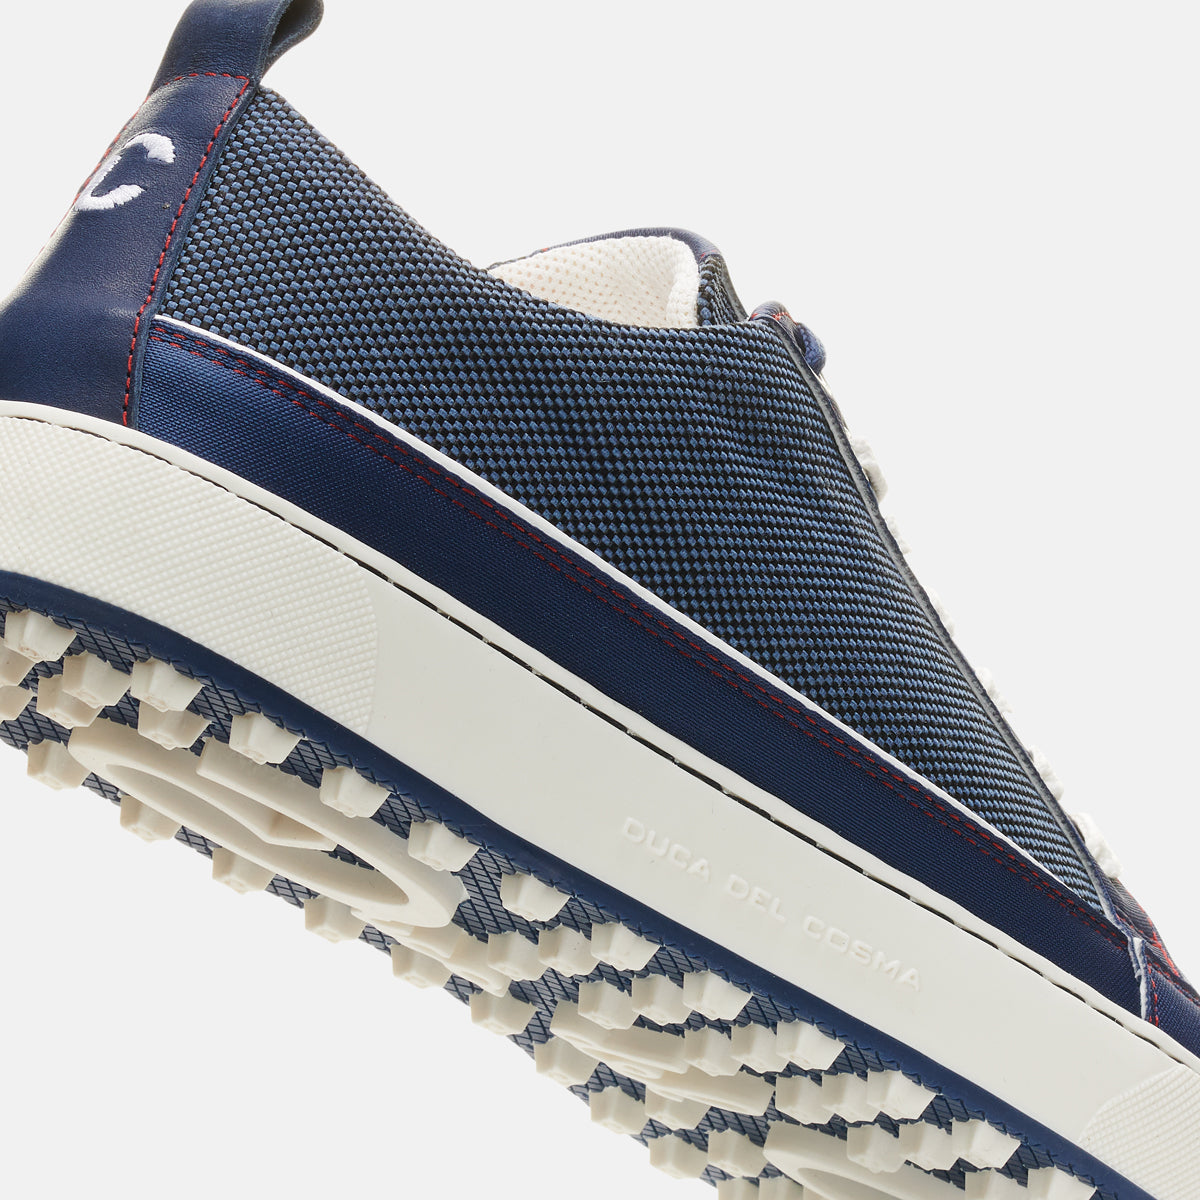 Laguna blue men's golf shoe is the best golf shoe for on and off the golf course